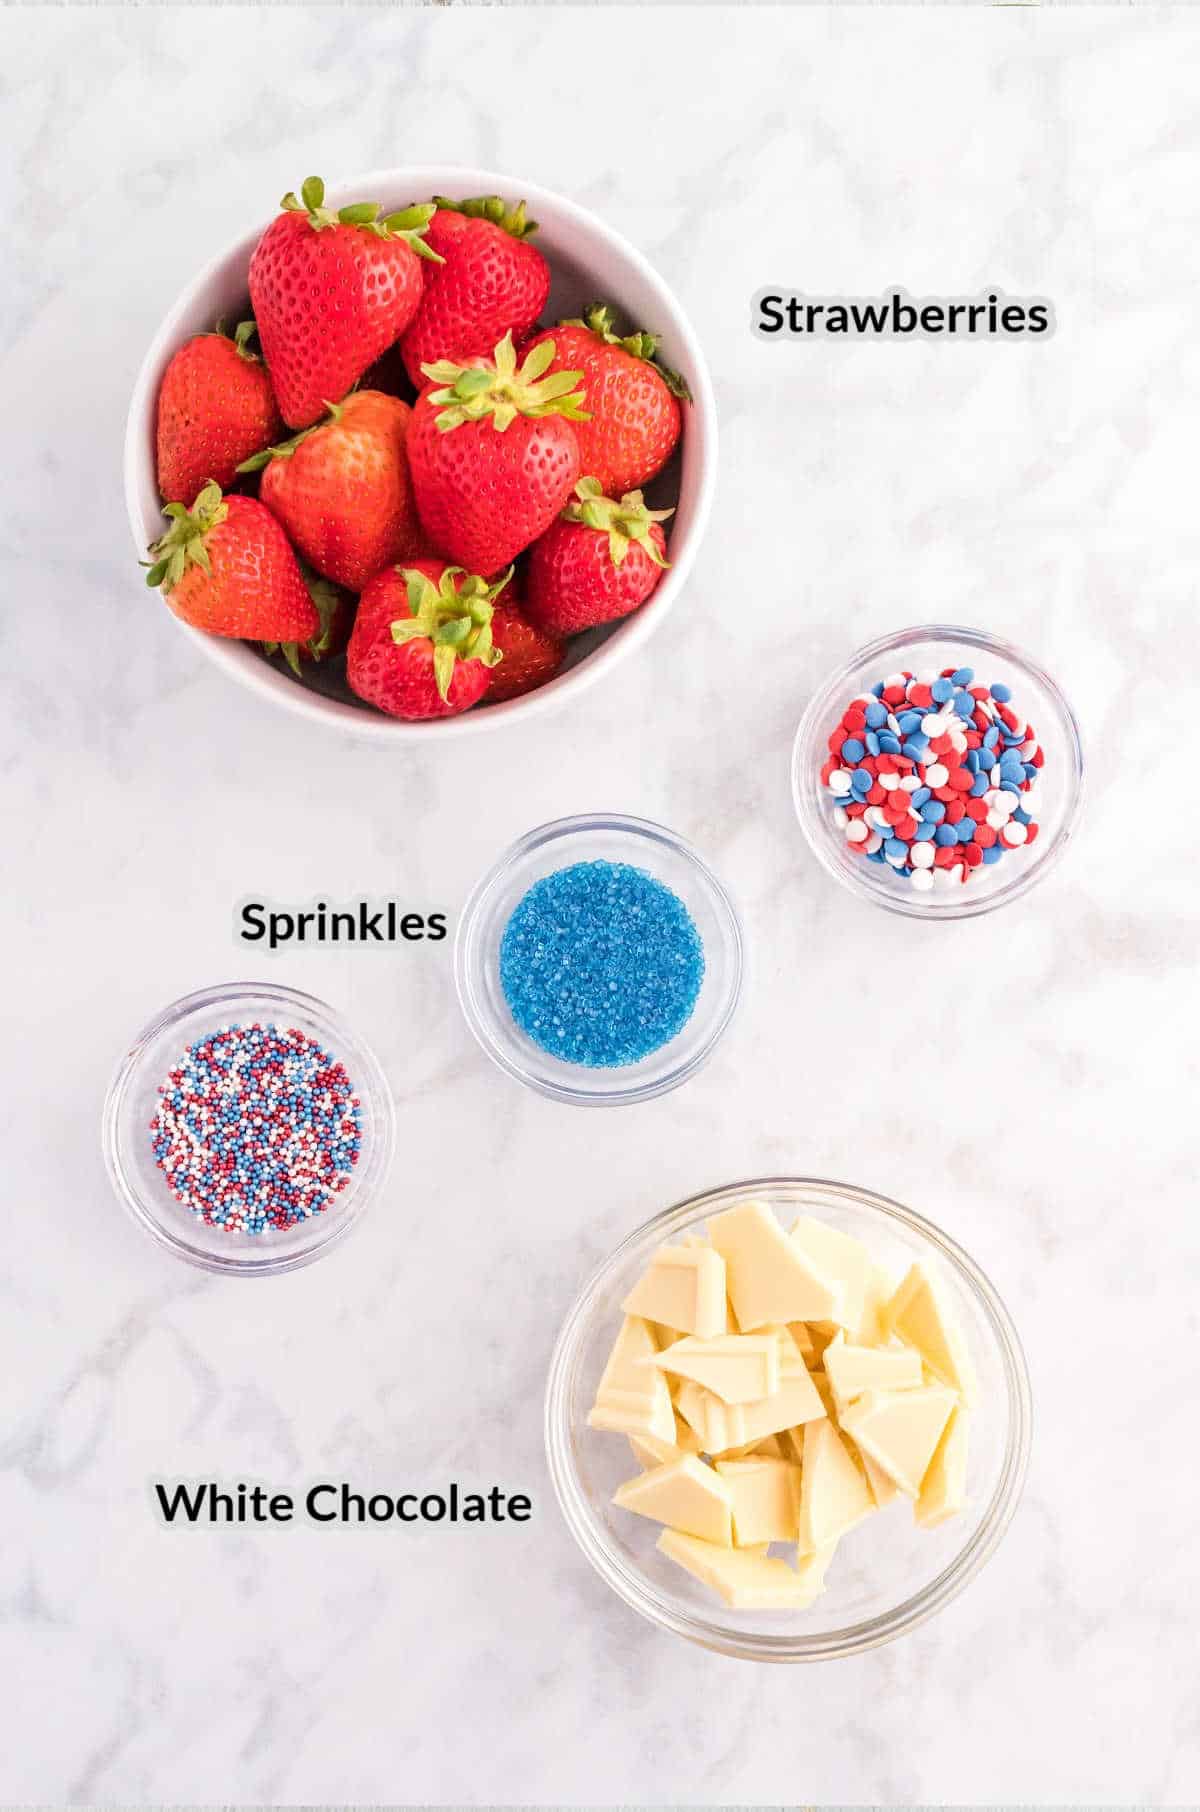 Overhead Image of the Red, White and Blue Strawberries Ingredients